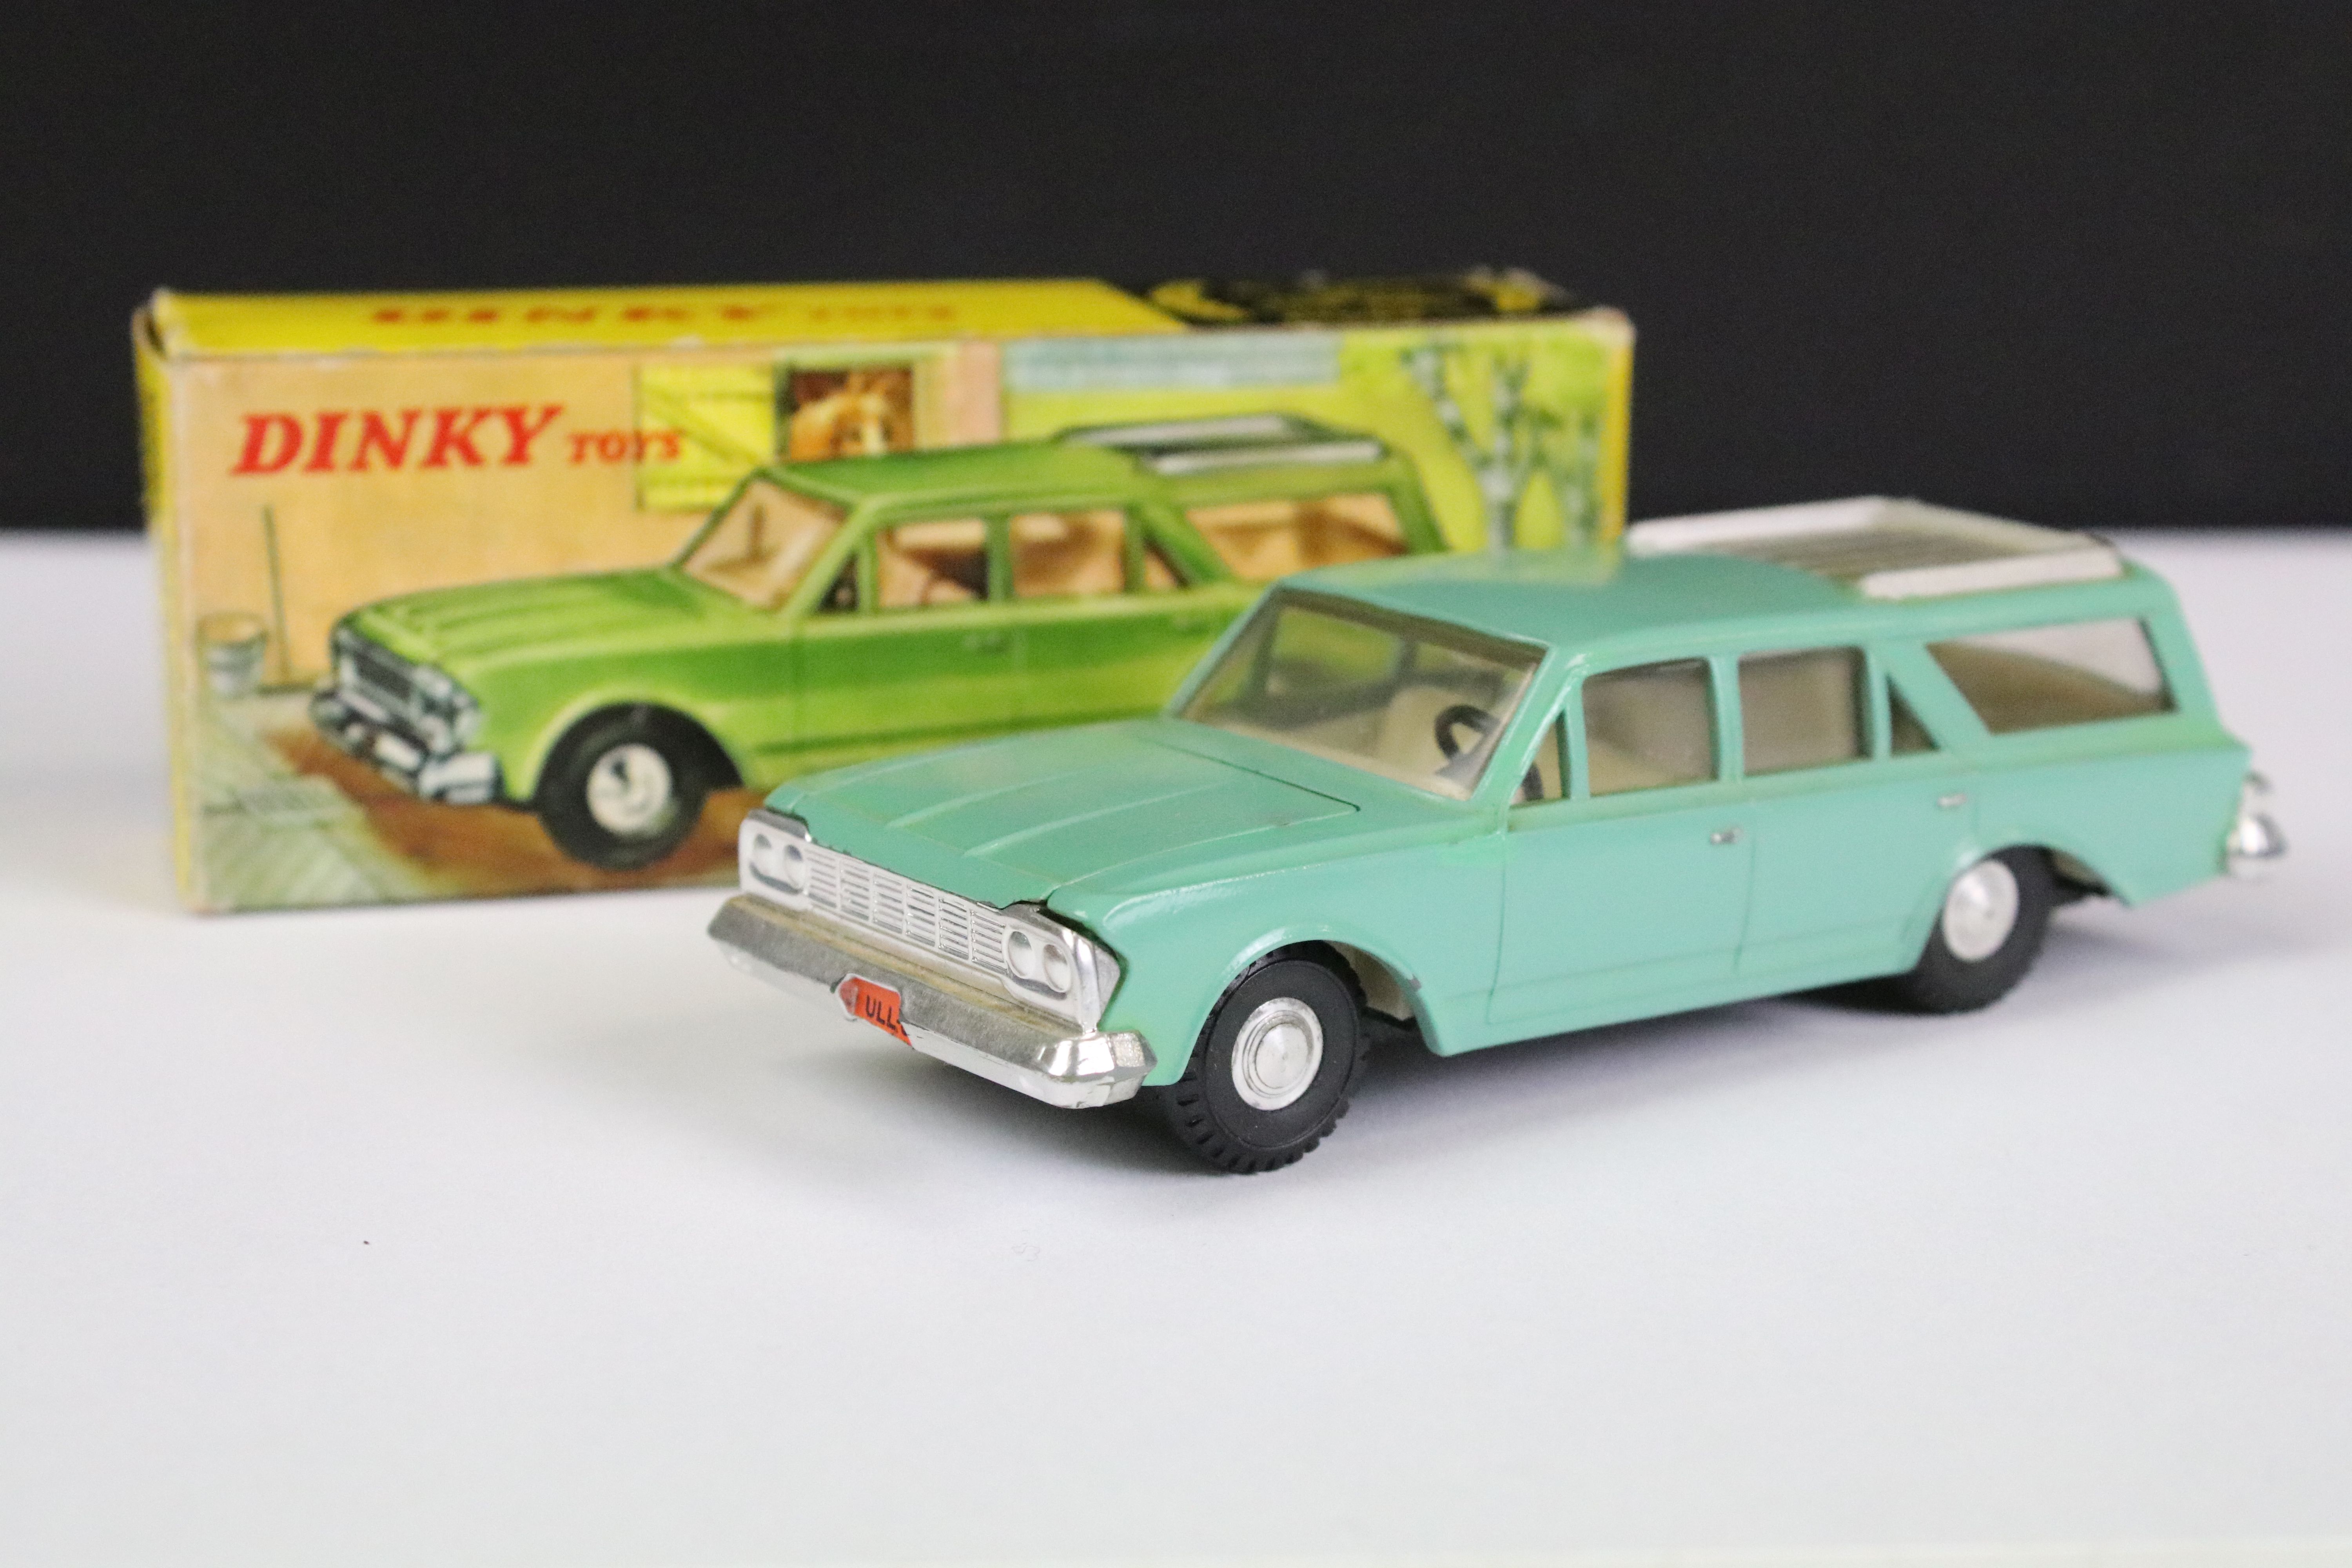 Boxed Hong Kong Dinky 57/006 Rambler Classic diecast model in pale green with silver roof and